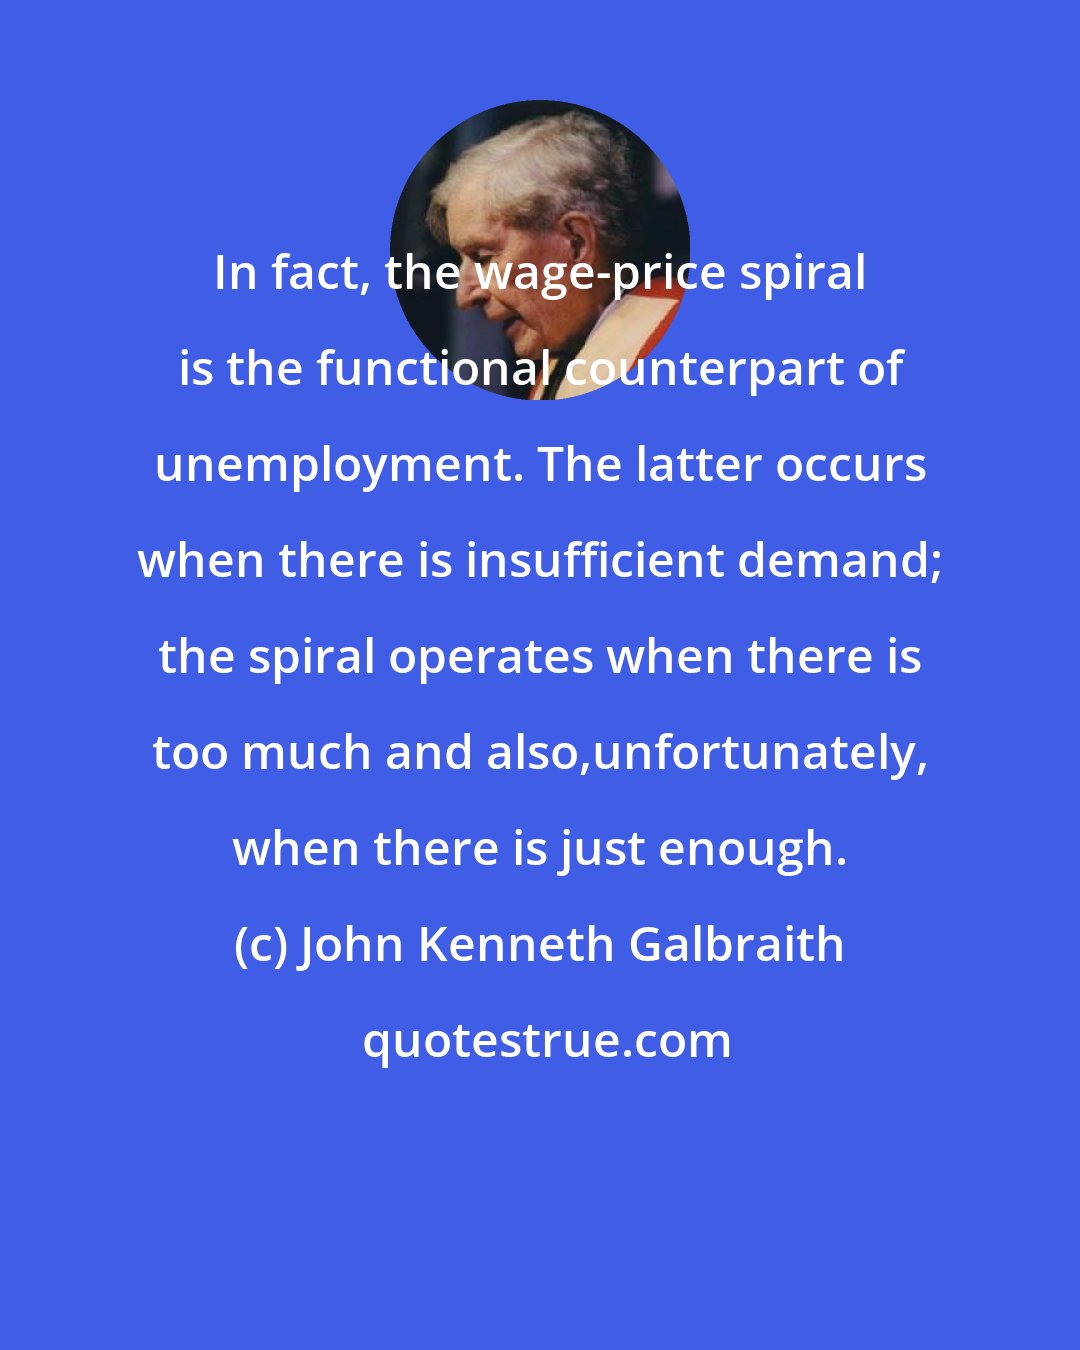 John Kenneth Galbraith: In fact, the wage-price spiral is the functional counterpart of unemployment. The latter occurs when there is insufficient demand; the spiral operates when there is too much and also,unfortunately, when there is just enough.